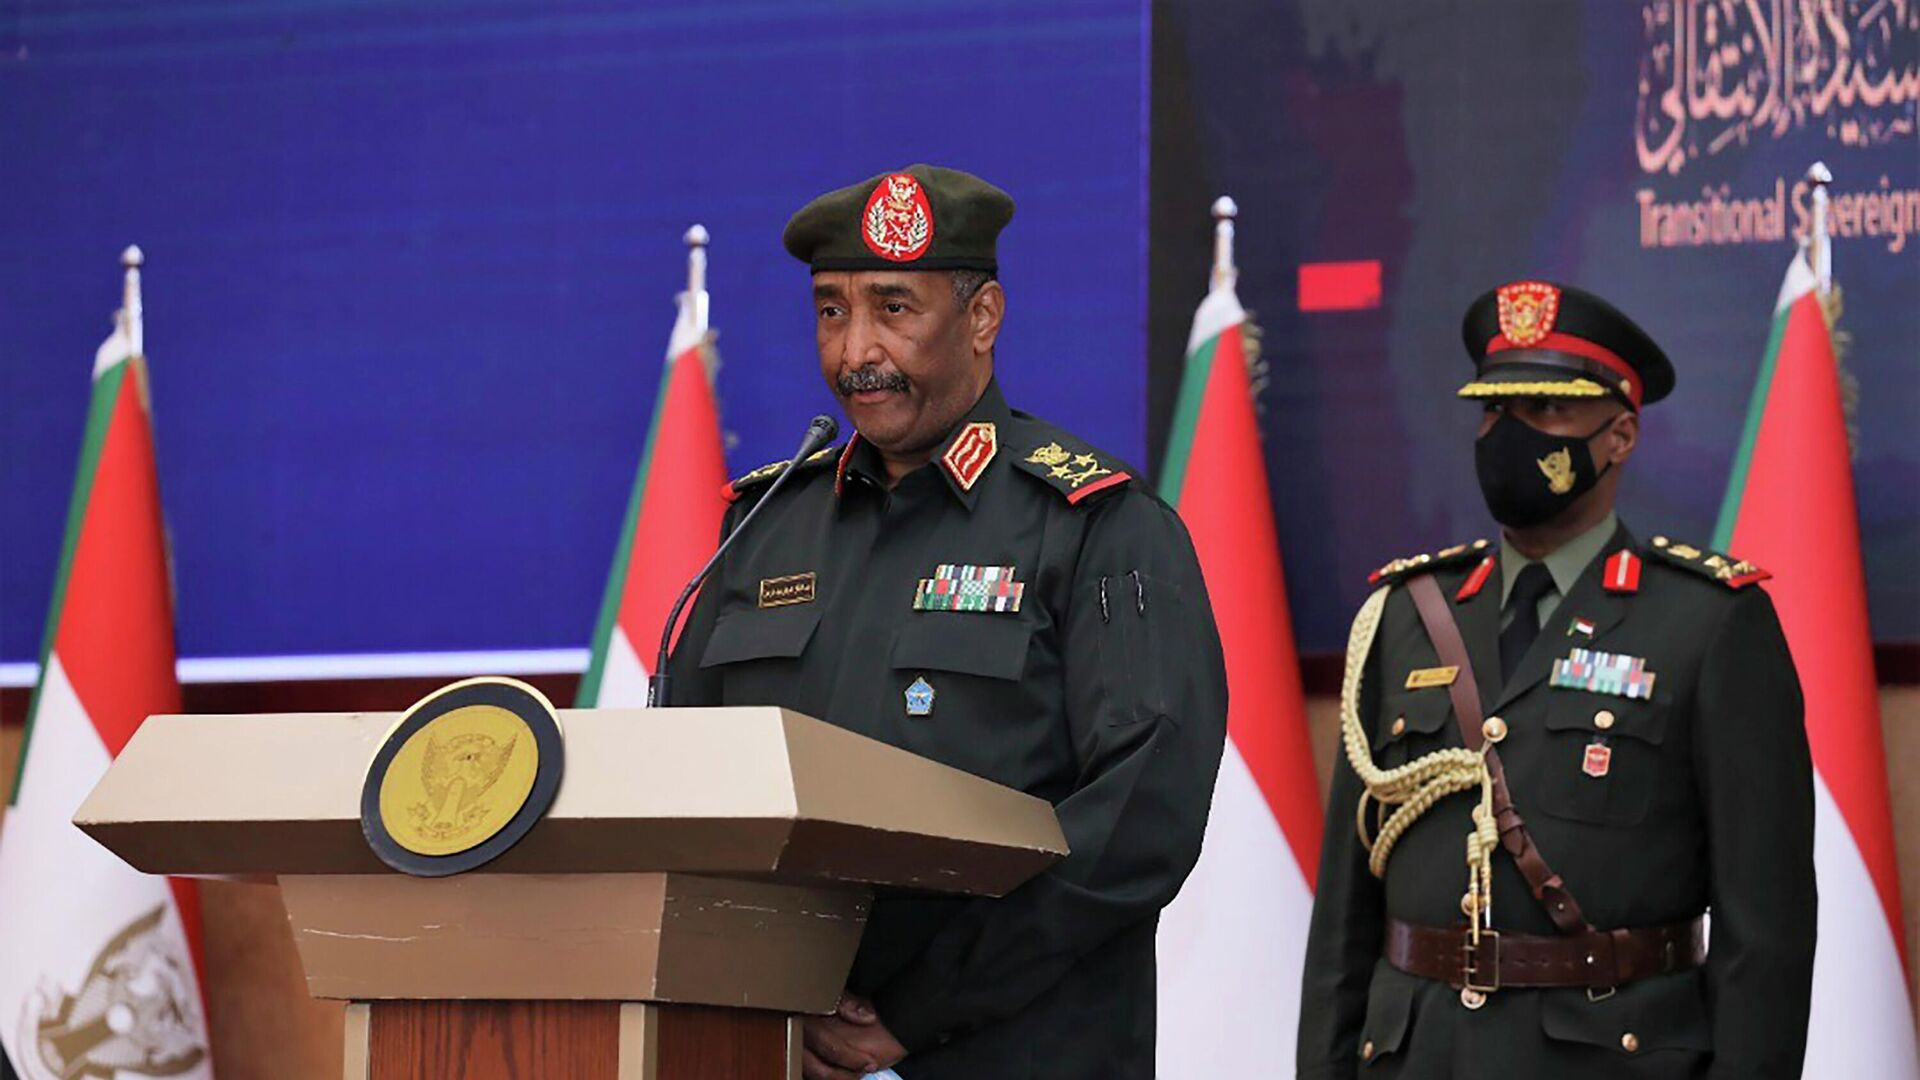 In this photo provided by the Sudan Transitional Sovereign Council, Sudan's top general Abdel Fattah Al-Burhan, center, speaks during a ceremony to reinstate Prime Minister Abdalla Hamdok, who was deposed in a coup last month, in Khartoum, Sudan, Sunday Nov. 21, 2021. Burhan, said in televised statements that Hamdok will lead an independent technocratic cabinet until elections can be held. It would still remain under military oversight. - Sputnik International, 1920, 29.05.2022